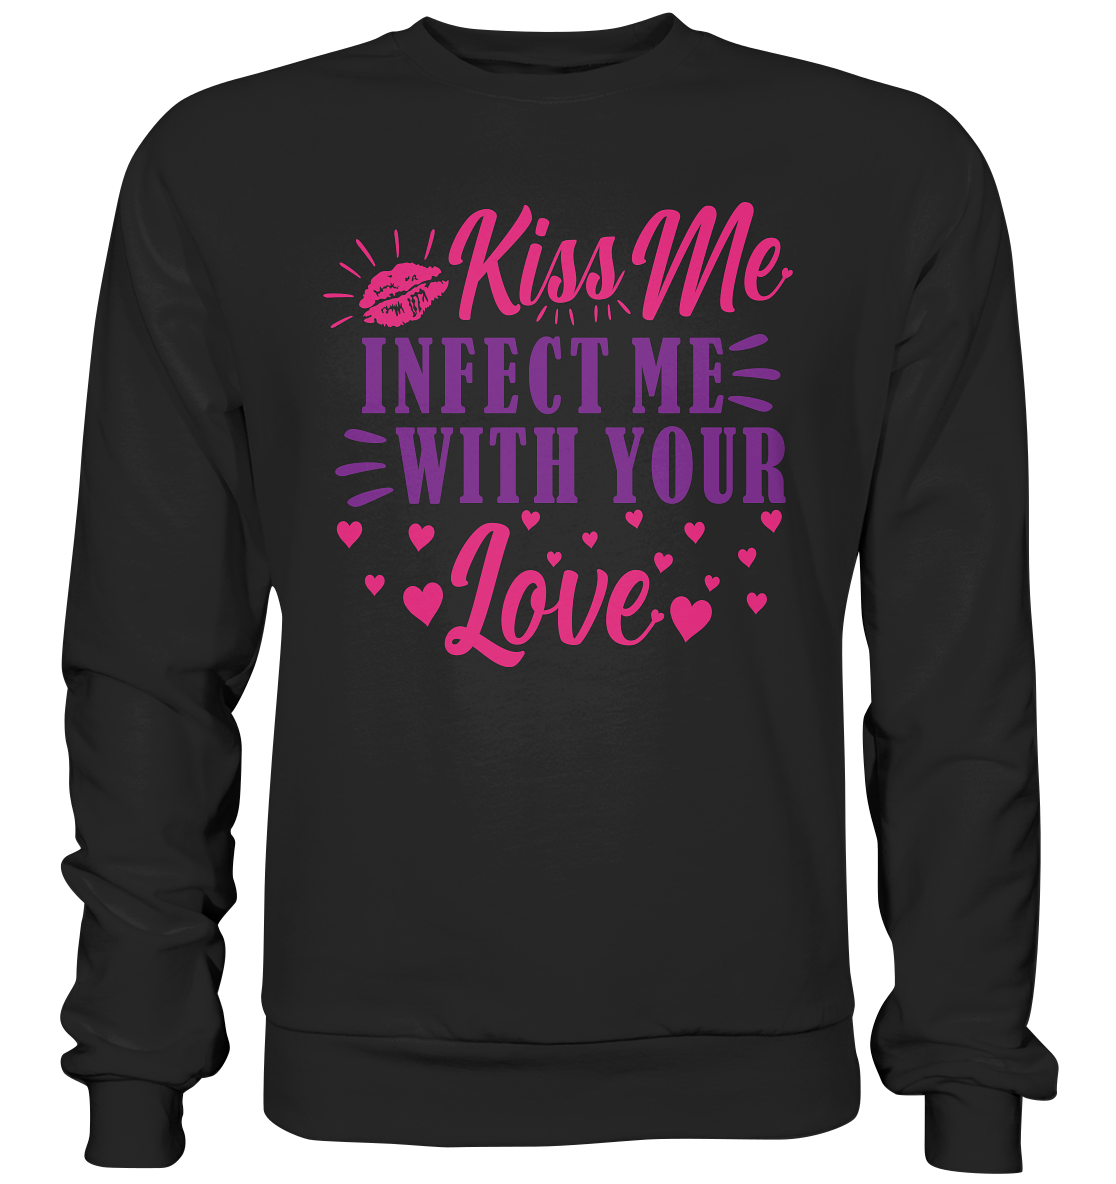 Kiss me infect me with your love - Premium Sweatshirt